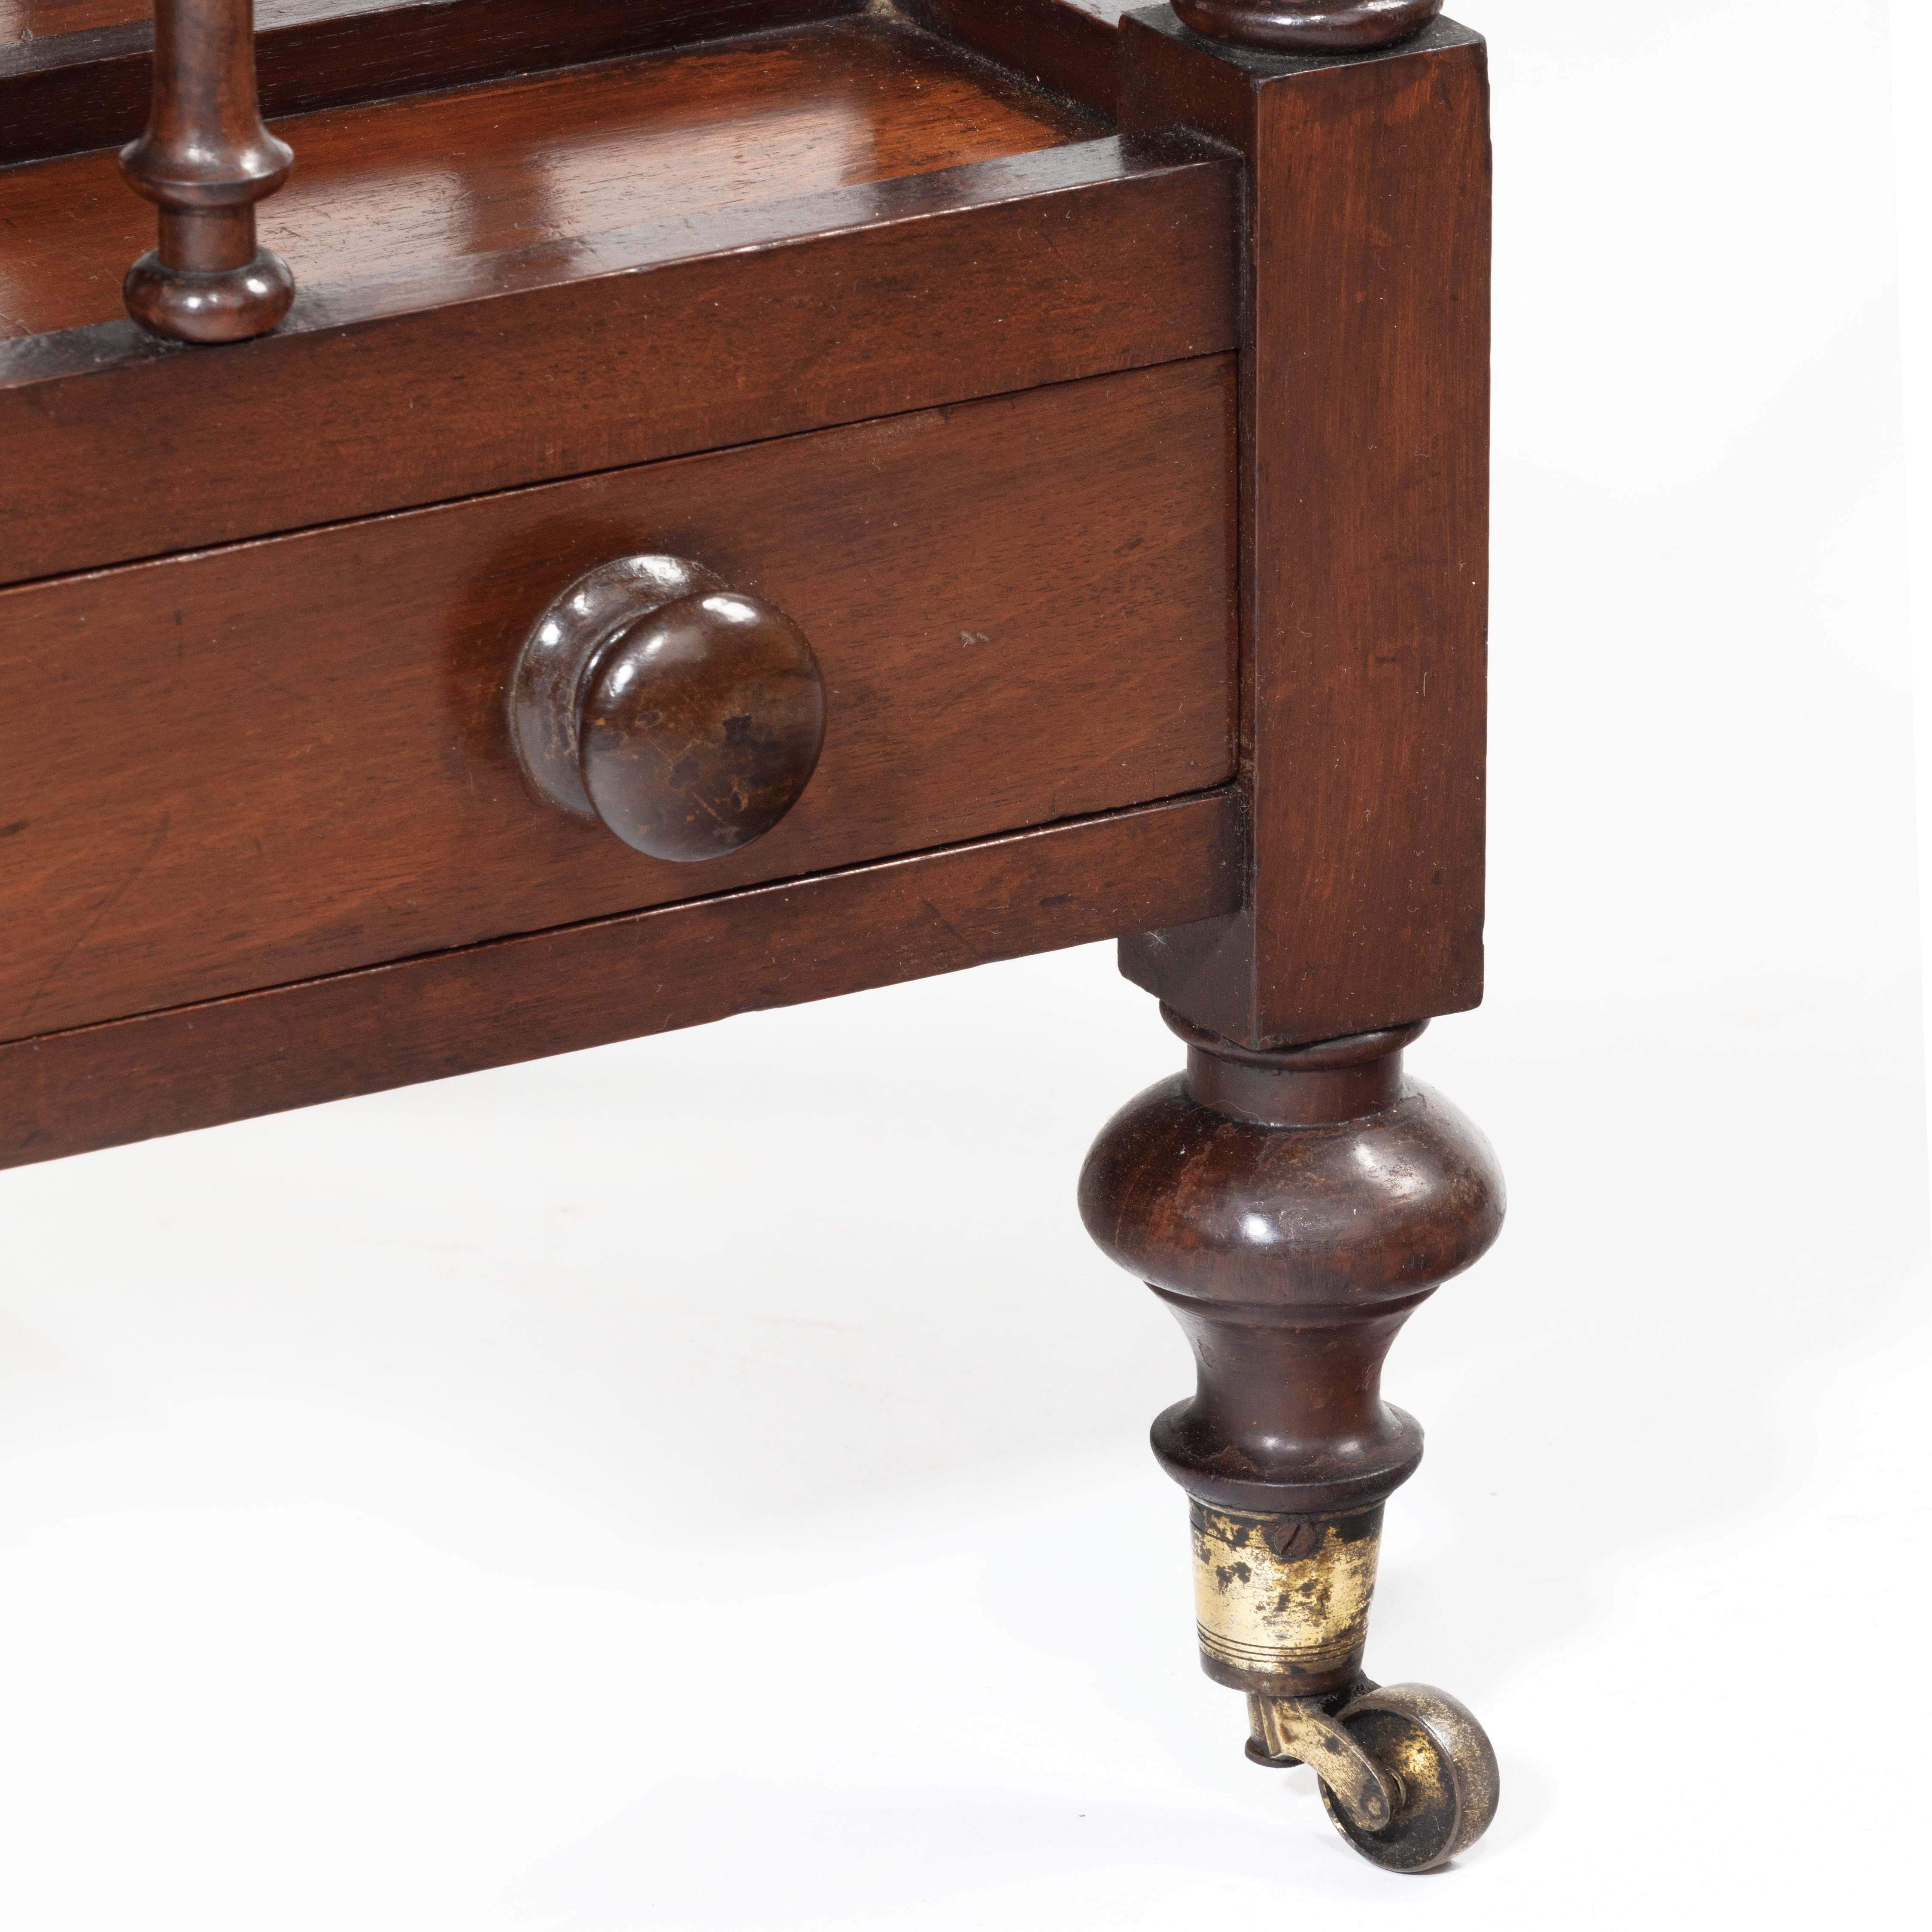 A three division boat-shaped mahogany Canterbury by Bentley, with turned spindles and spinning top feet with the original brass castors, the drawer to the frieze with wooden knop handles. Signed on the bottom of the drawer ‘Bentley, Stoke’, English,